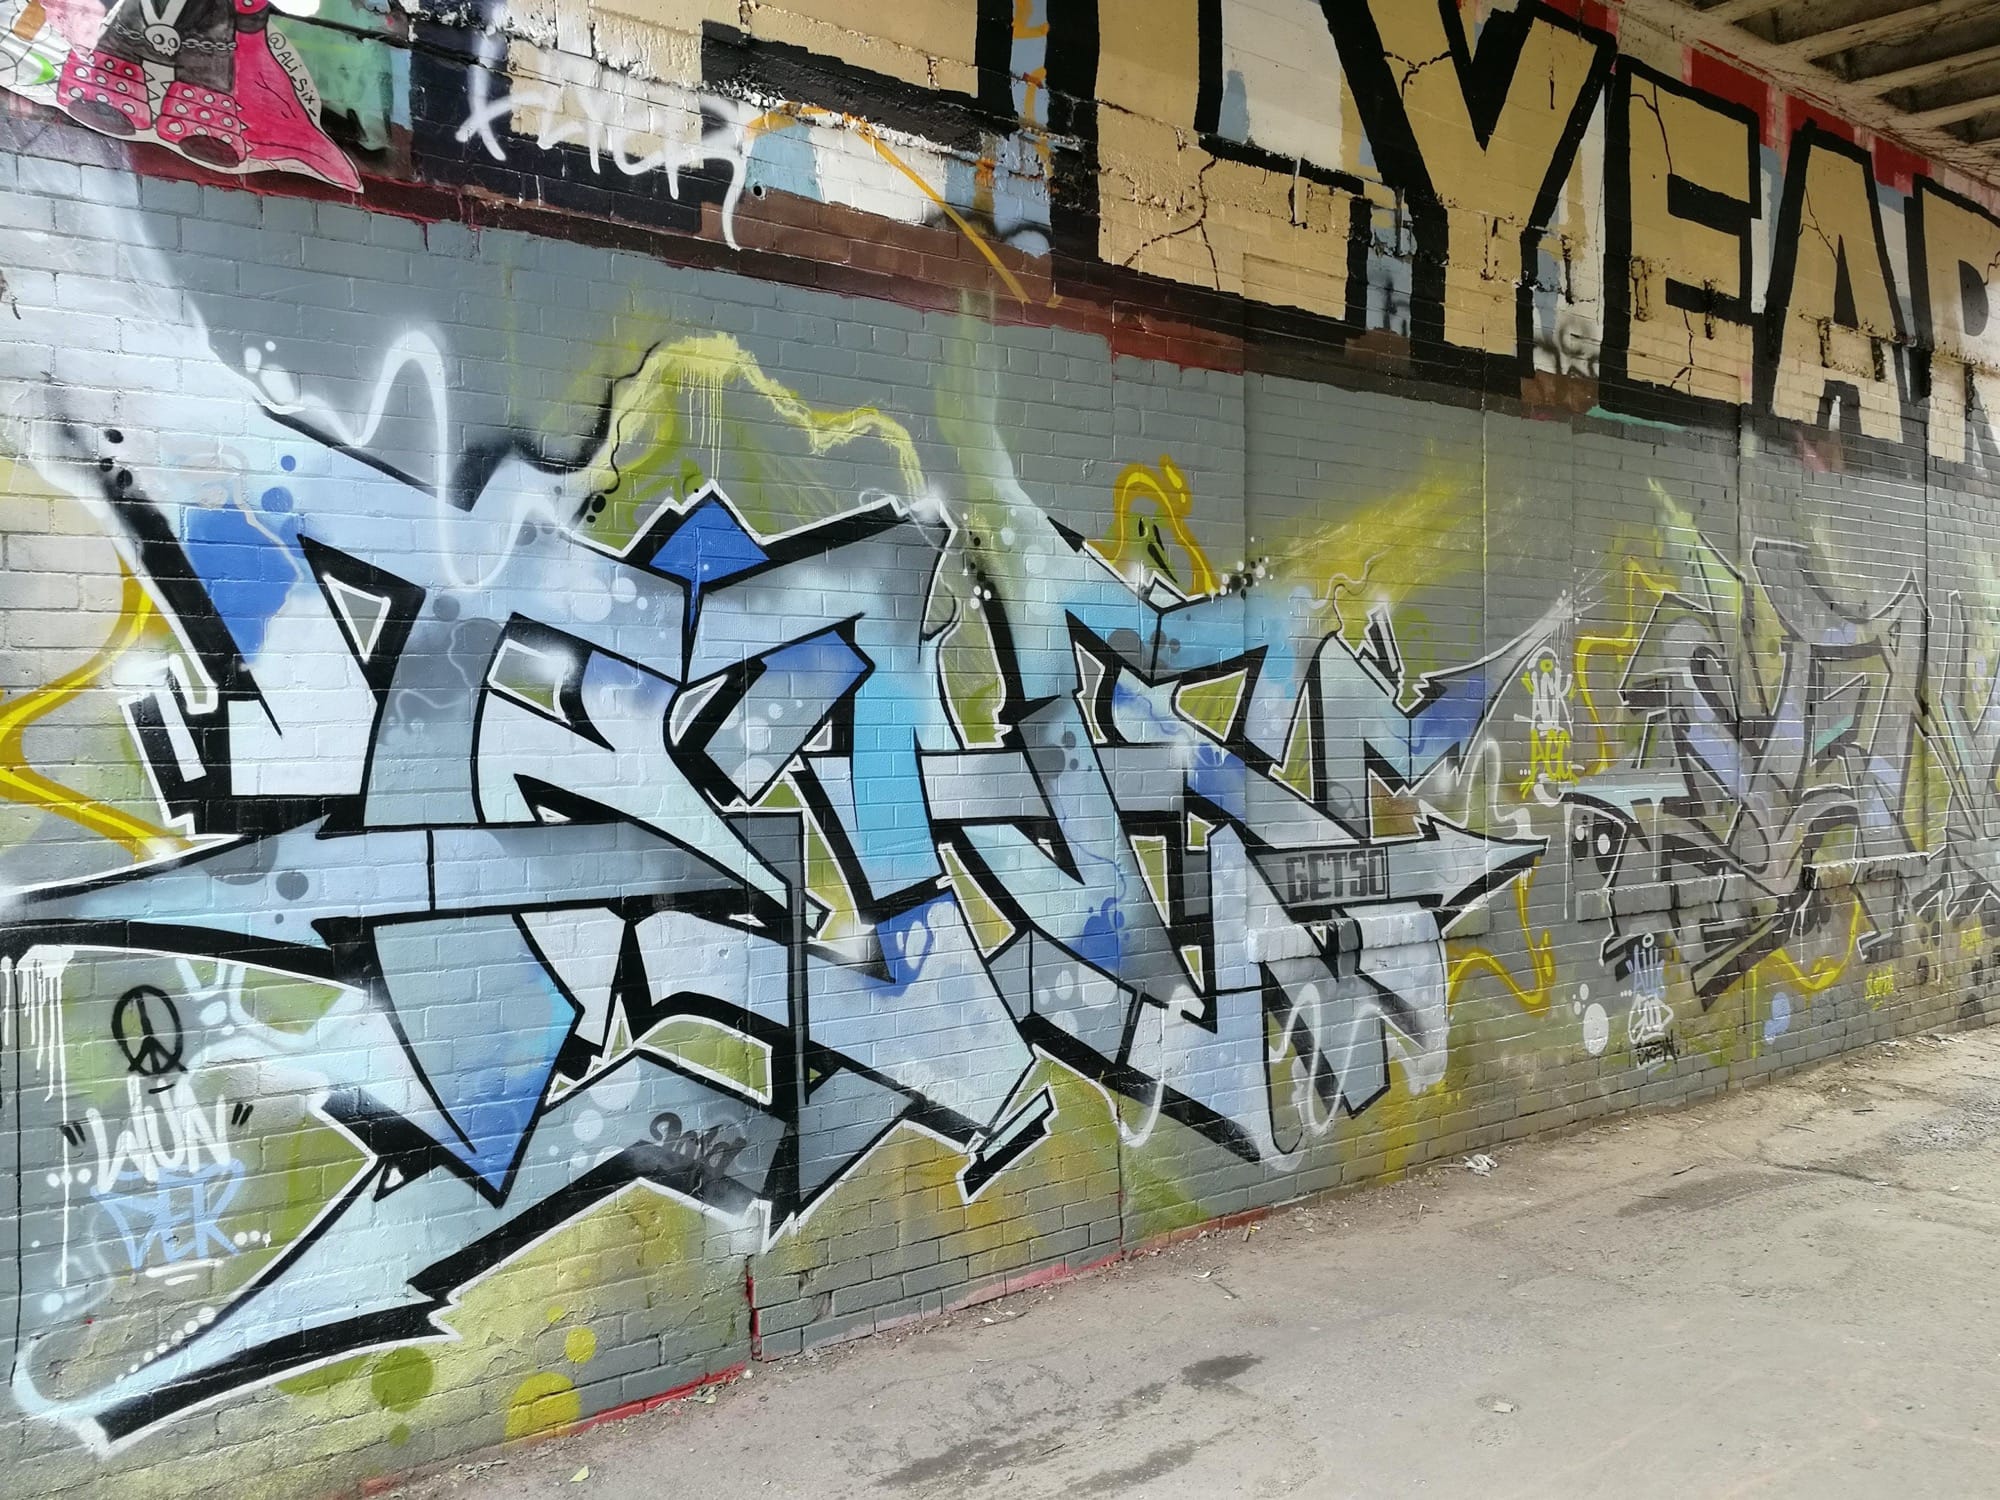 Graffiti 2553  captured by Rabot in Toronto Canada